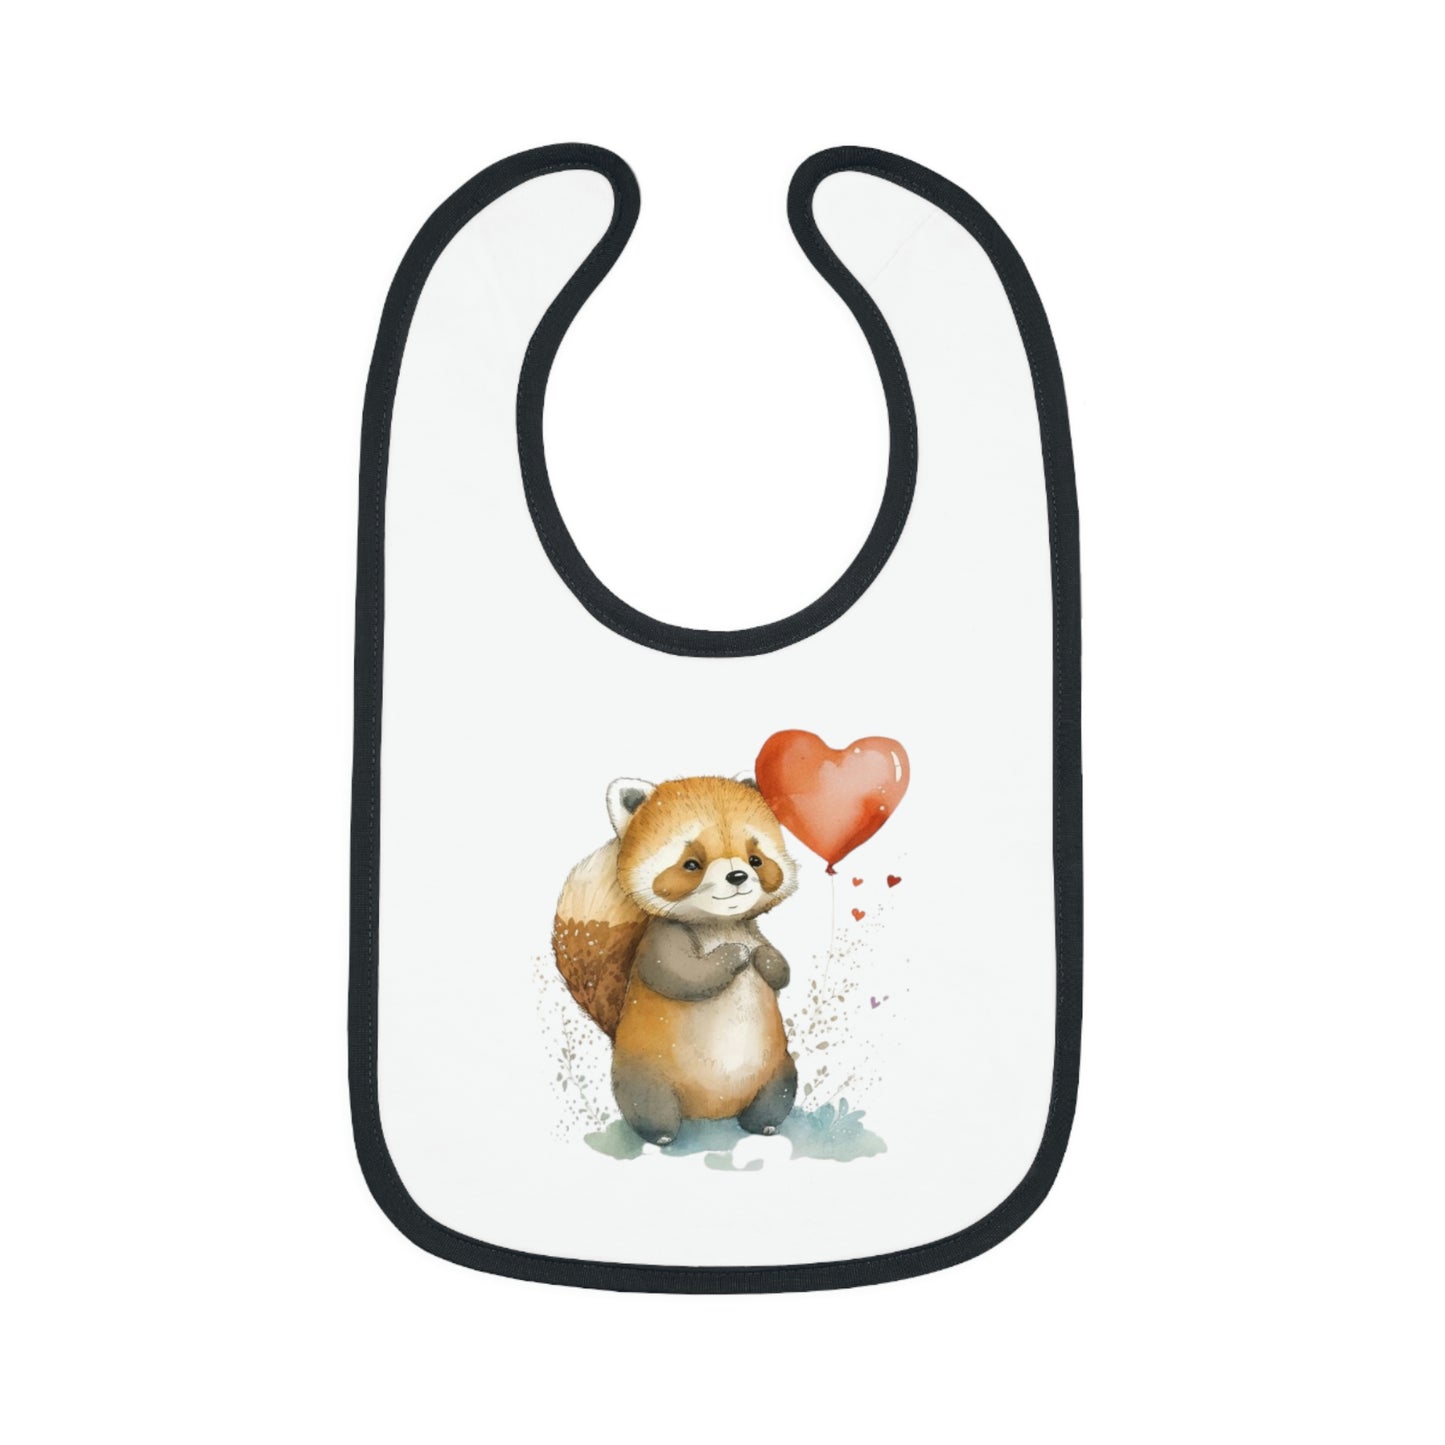 "Balloon Buddy" Baby Bib - Weave Got Gifts - Unique Gifts You Won’t Find Anywhere Else!